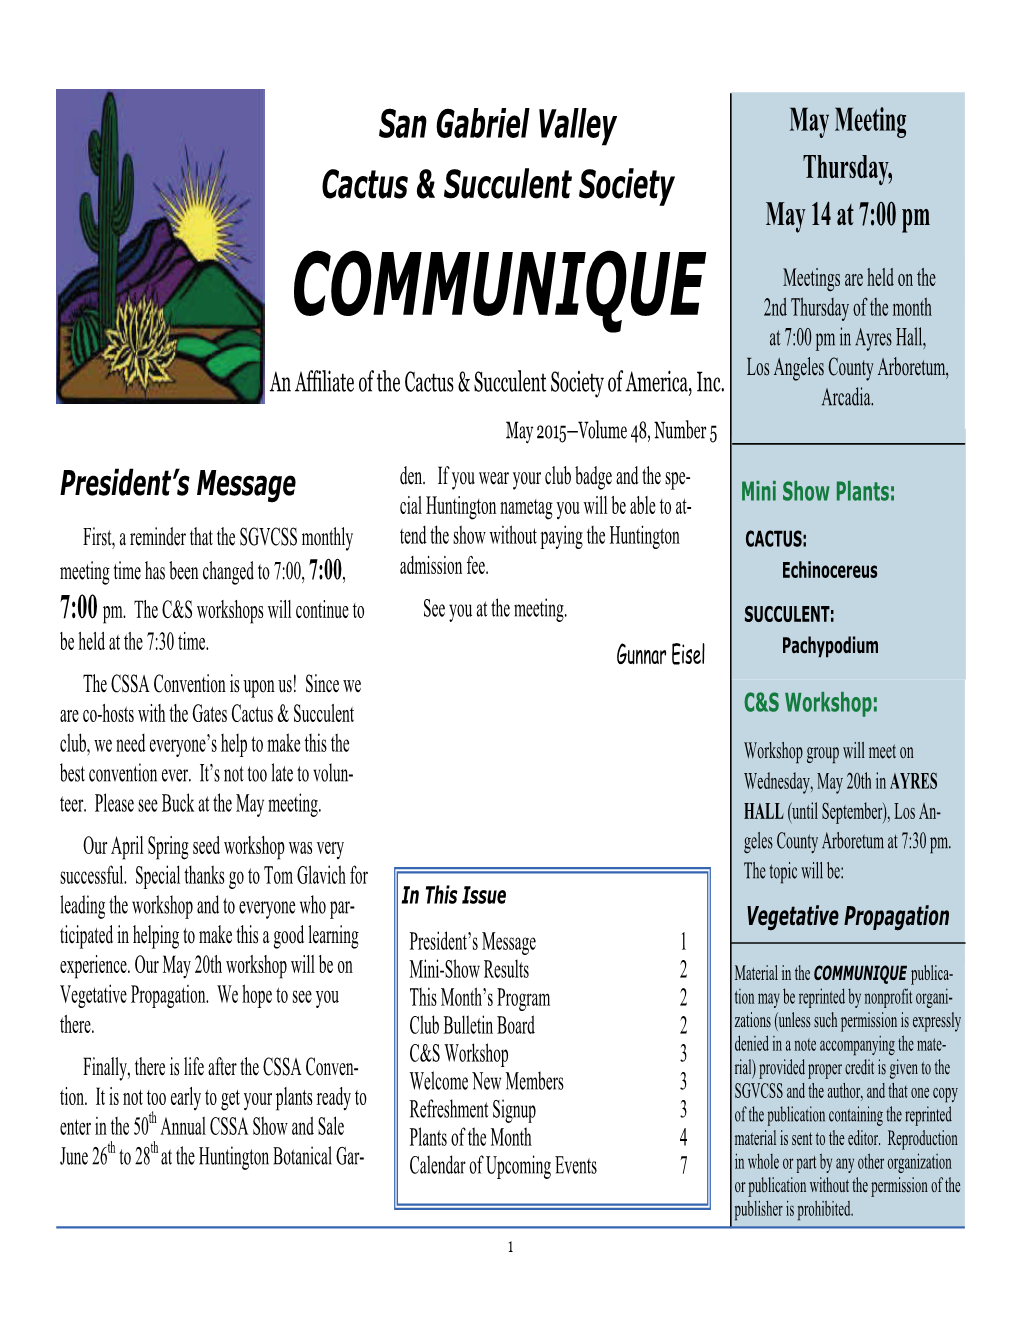 COMMUNIQUE 2Nd Thursday of the Month at 7:00 Pm in Ayres Hall, Los Angeles County Arboretum, an Affiliate of the Cactus & Succulent Society of America, Inc